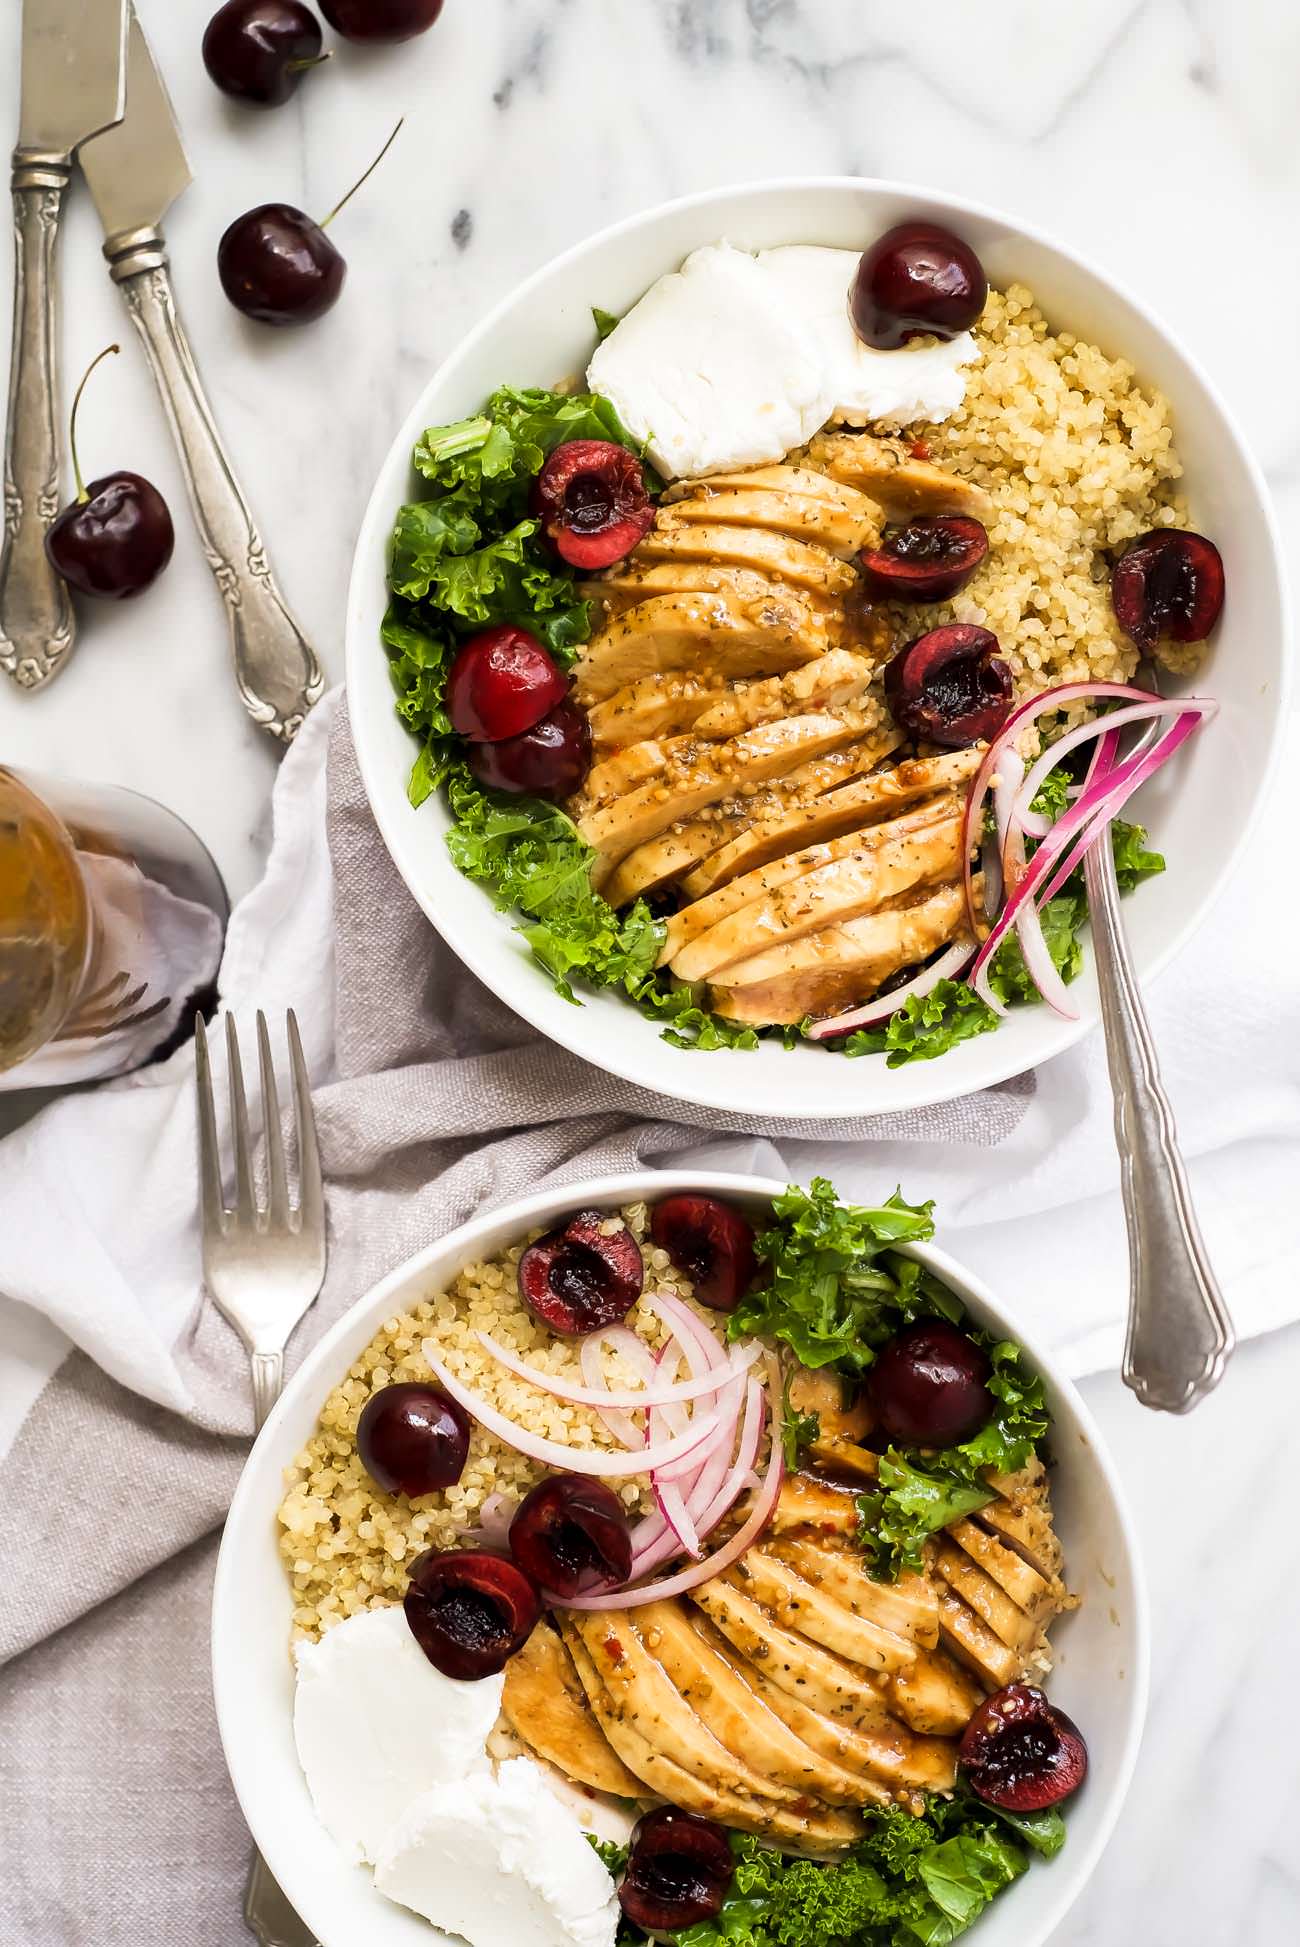 Honey Balsamic Glazed Chicken Quinoa Bowls are a hearty and flavor meal! Juicy chicken is coated in a sticky, sweet balsamic glaze then paired with fluffy quinoa, creamy goat cheese, and fresh cherries. A perfect make ahead meal!